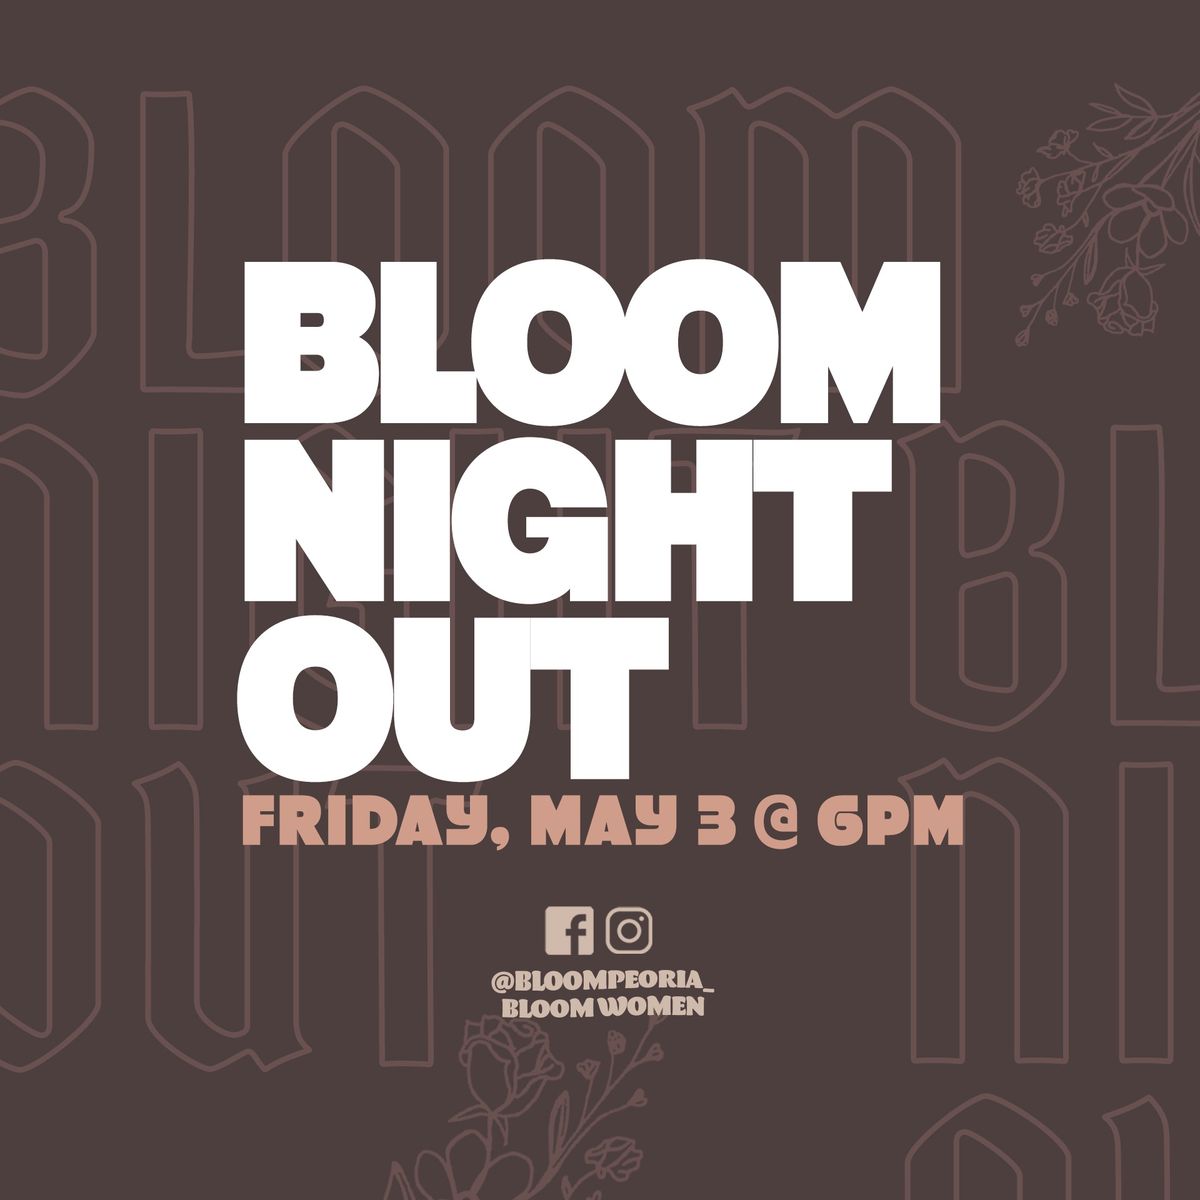 Bloom Night Out